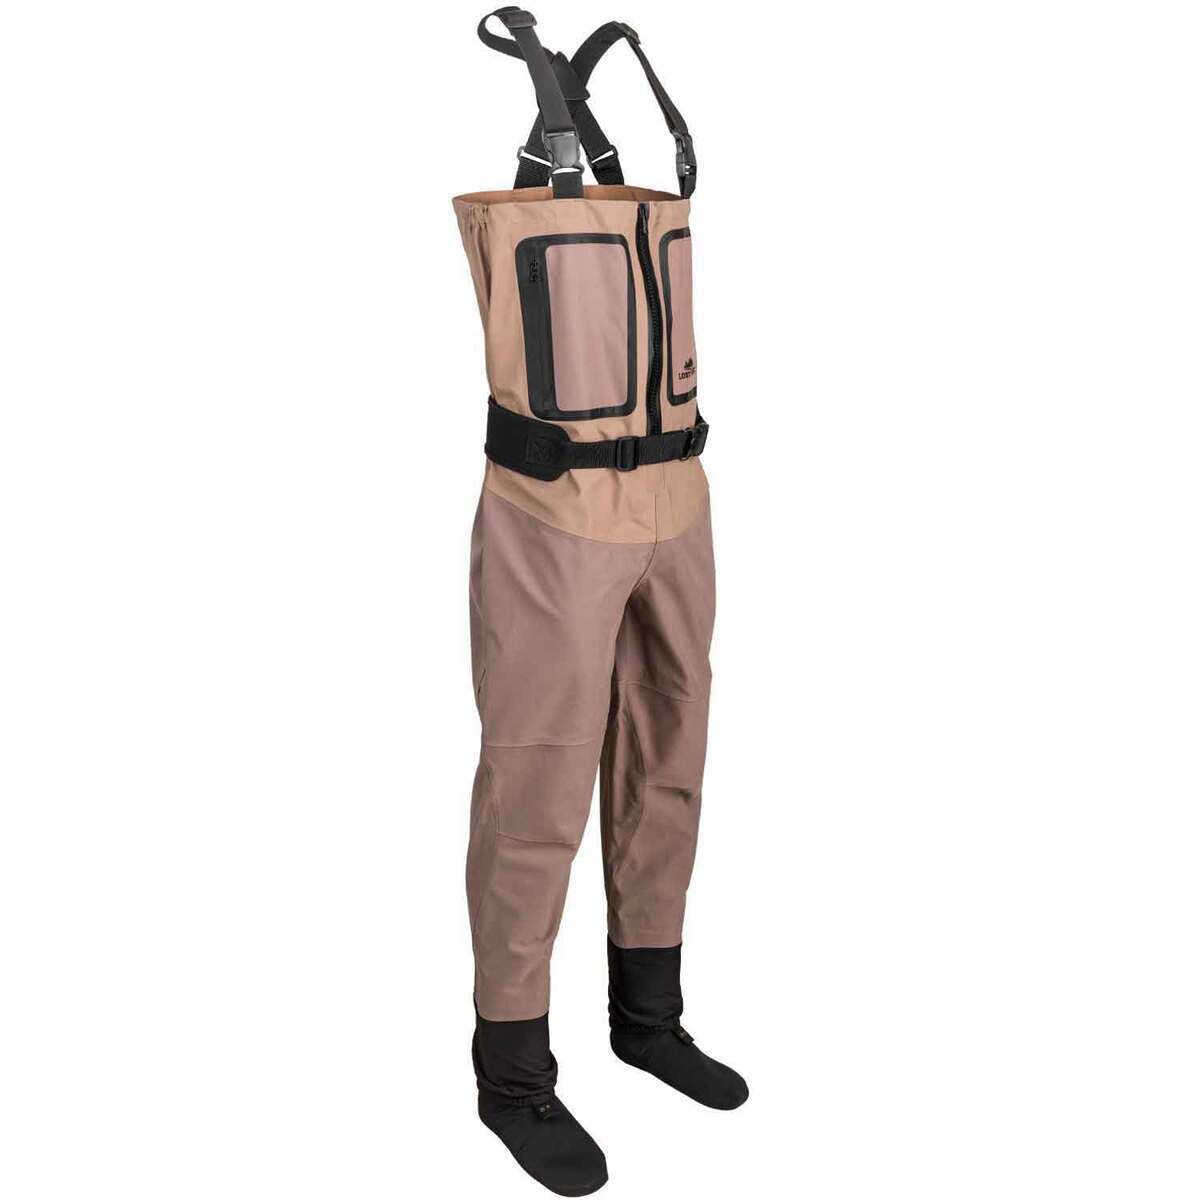 Fishing Waders for Men for sale in Austin, Texas